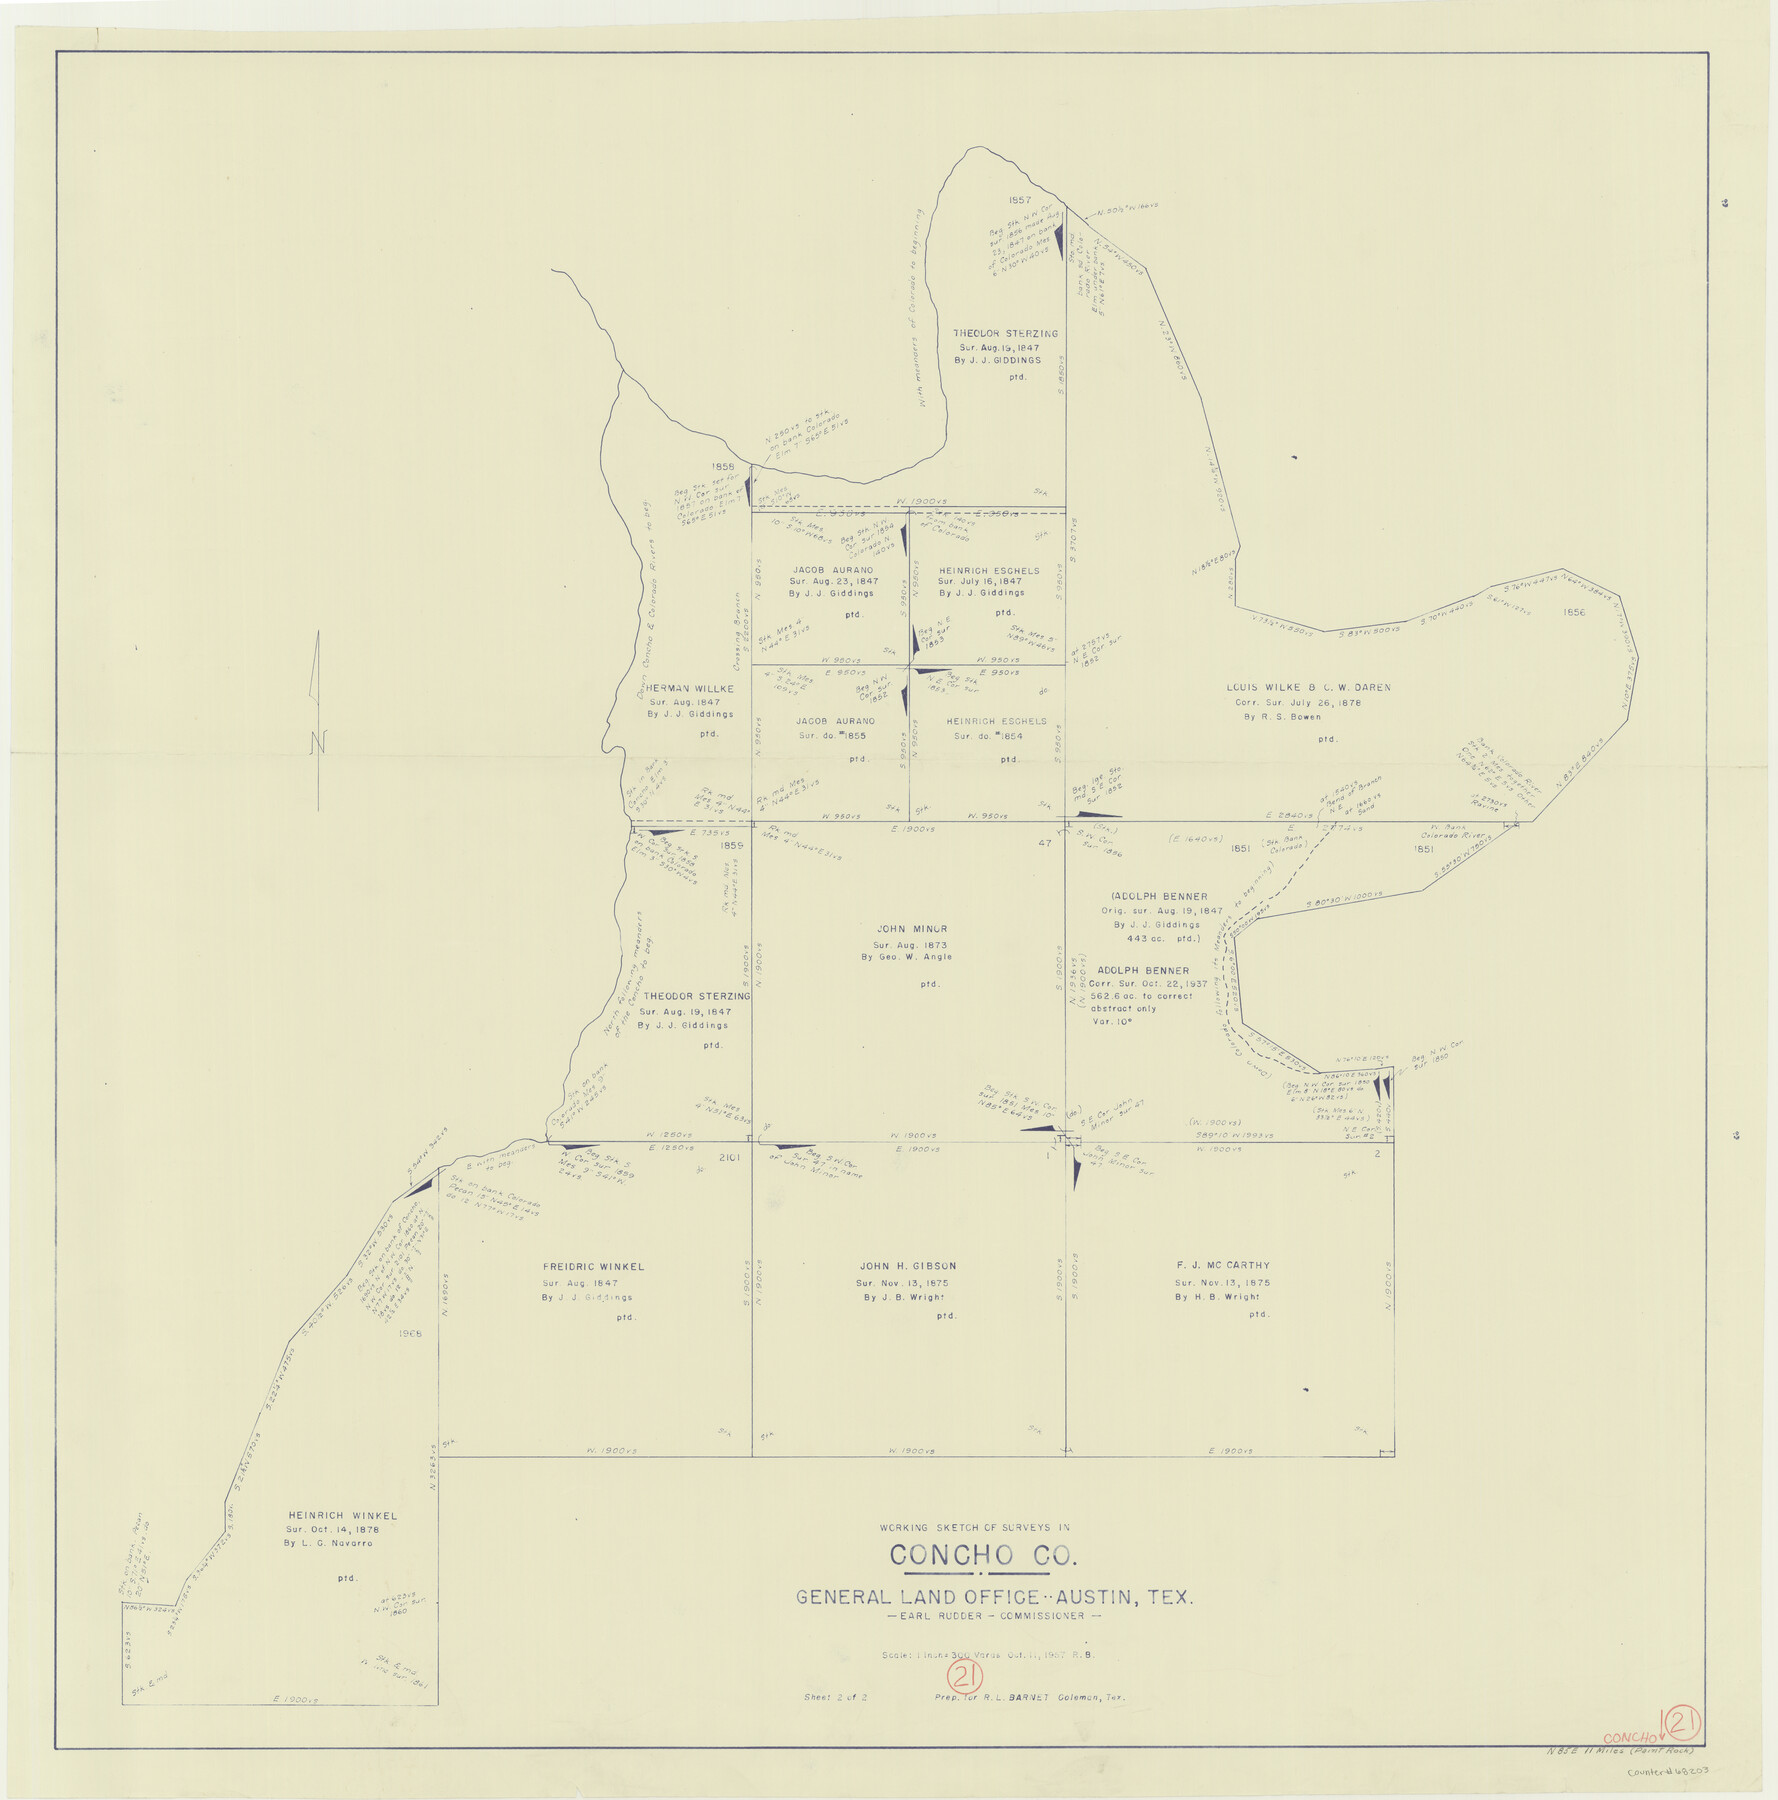 68203, Concho County Working Sketch 21, General Map Collection